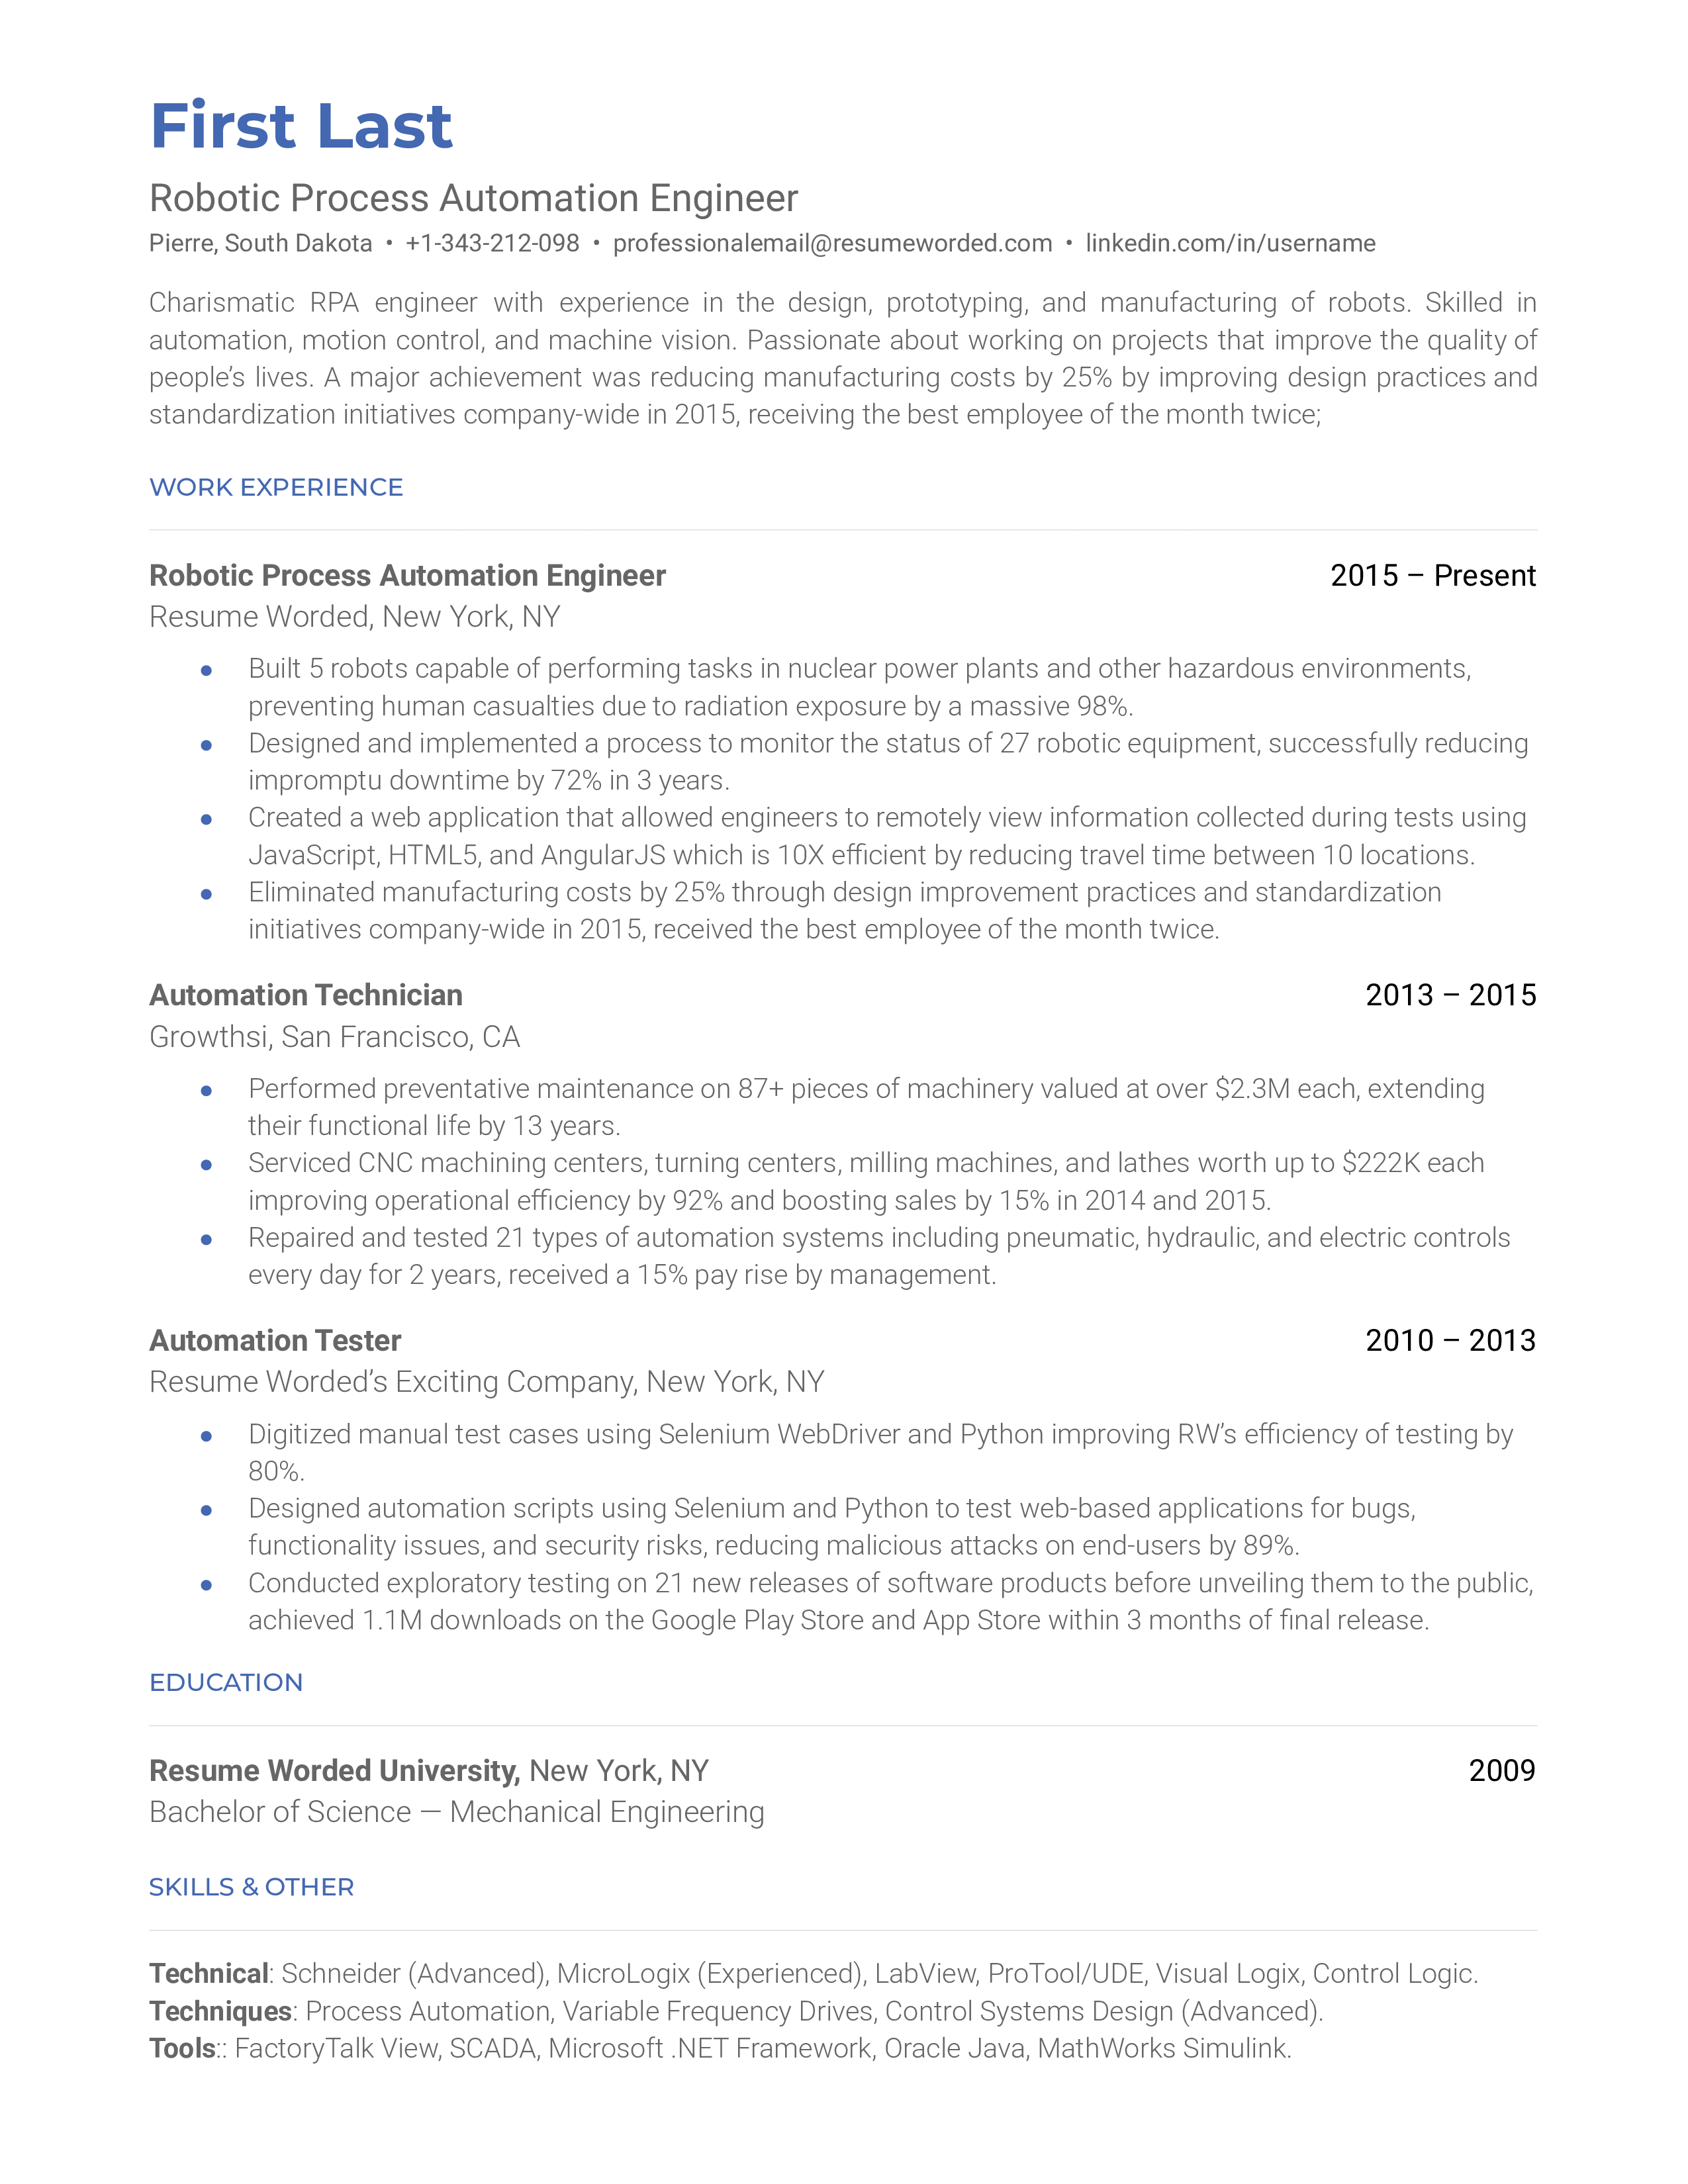 Robot Process Automation Engineer resume sample that highlights applicant's experience and tools section.